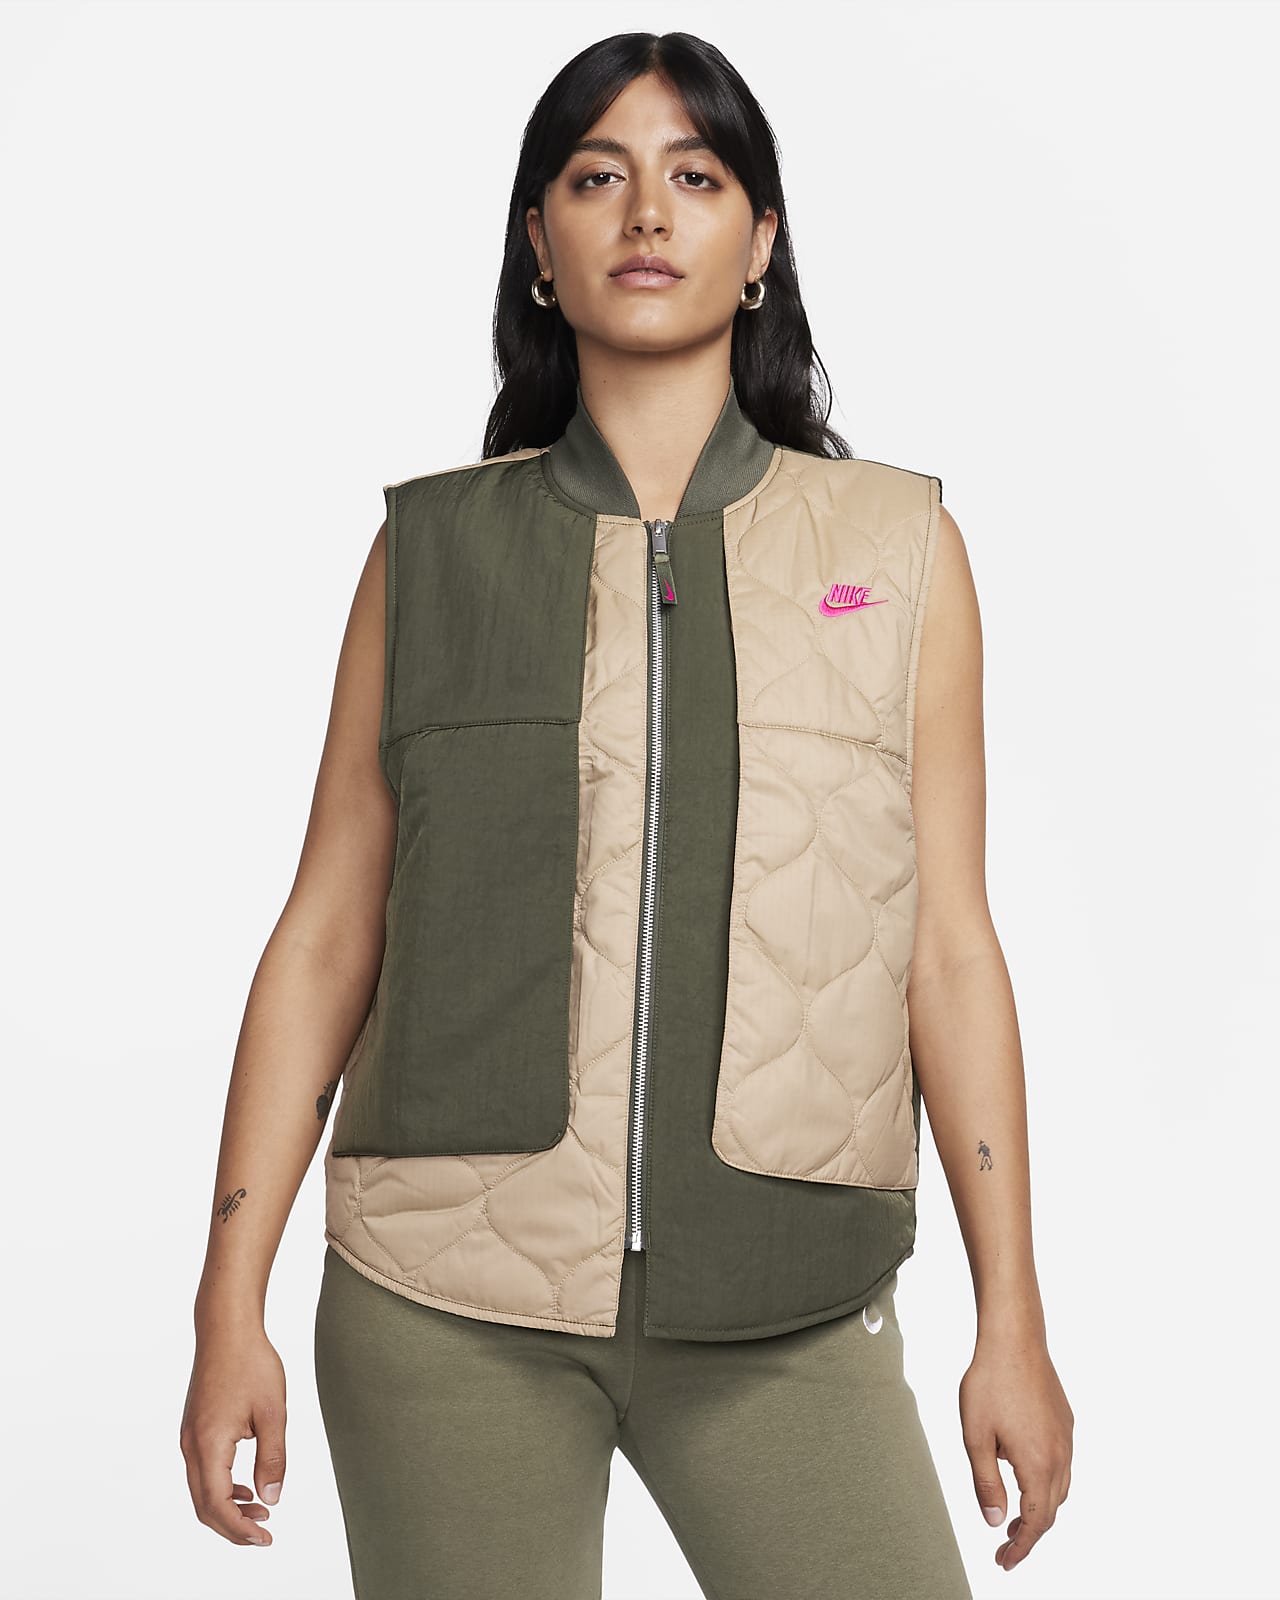 Nike Sportswear City Utility Women's Repel Quilted Vest